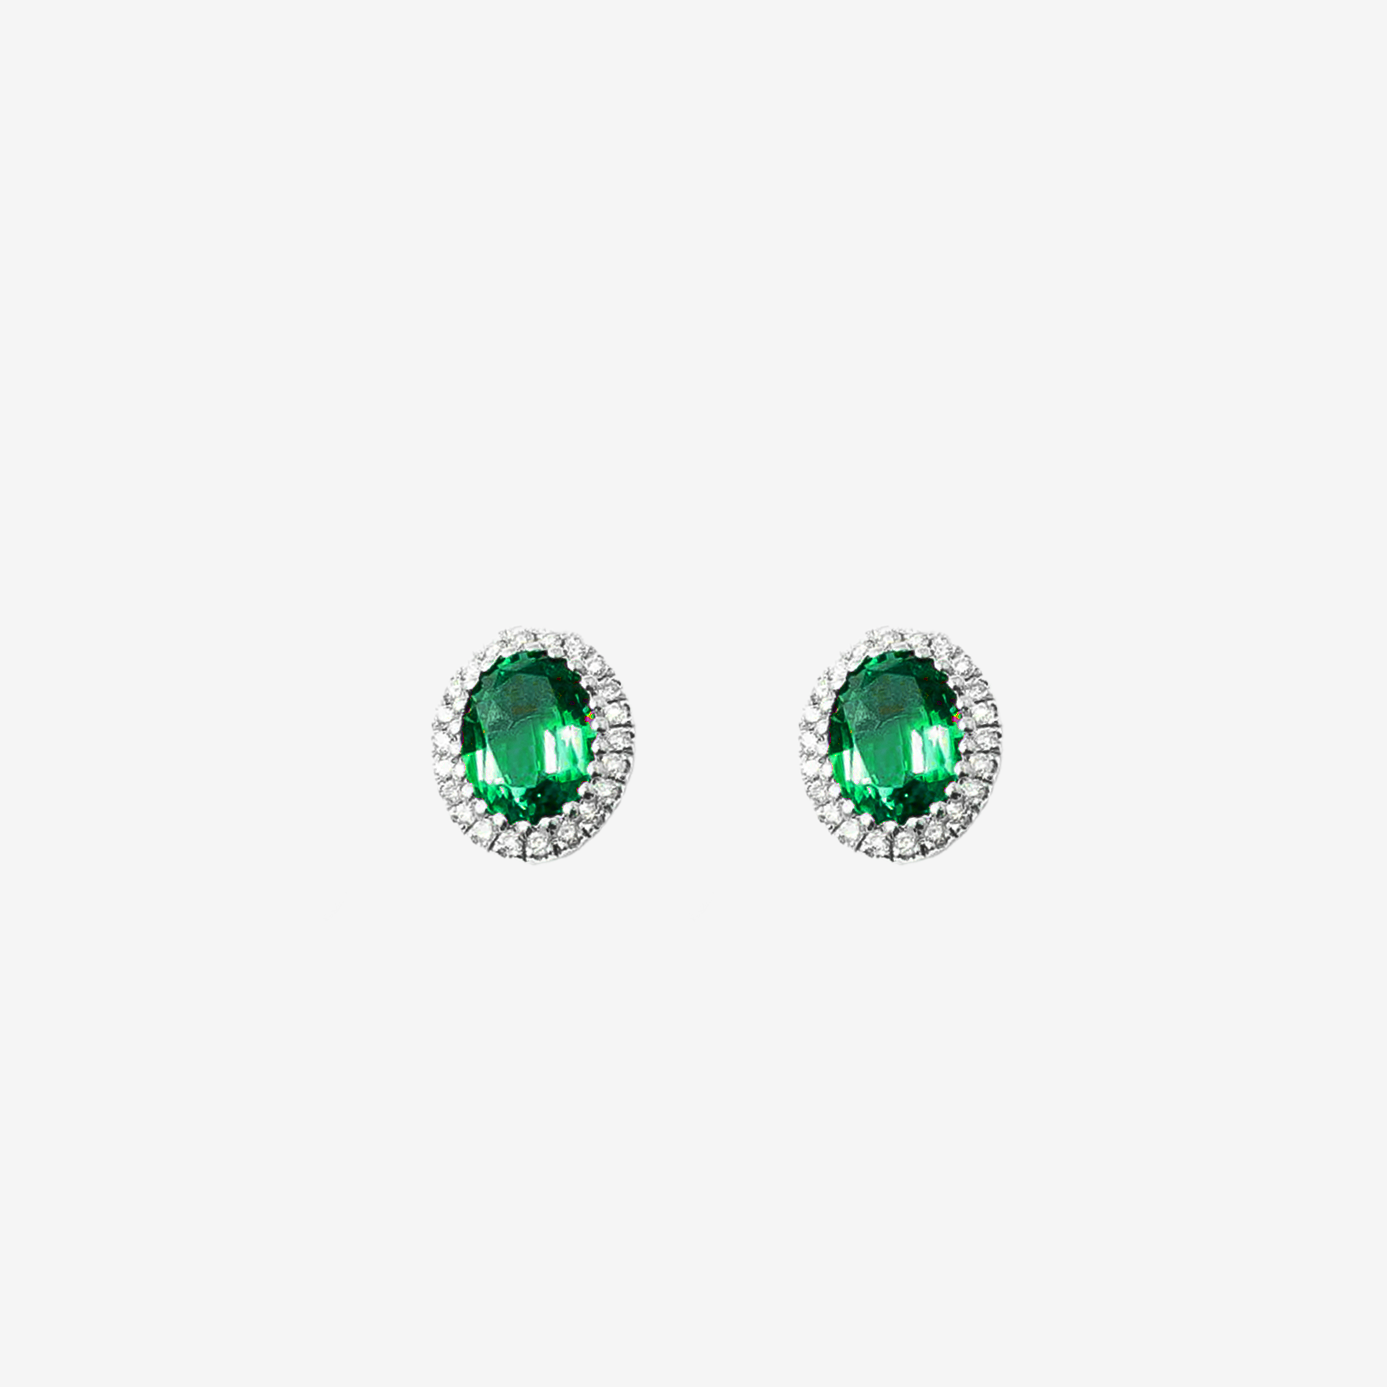 Earrings with Emeralds and Diamonds